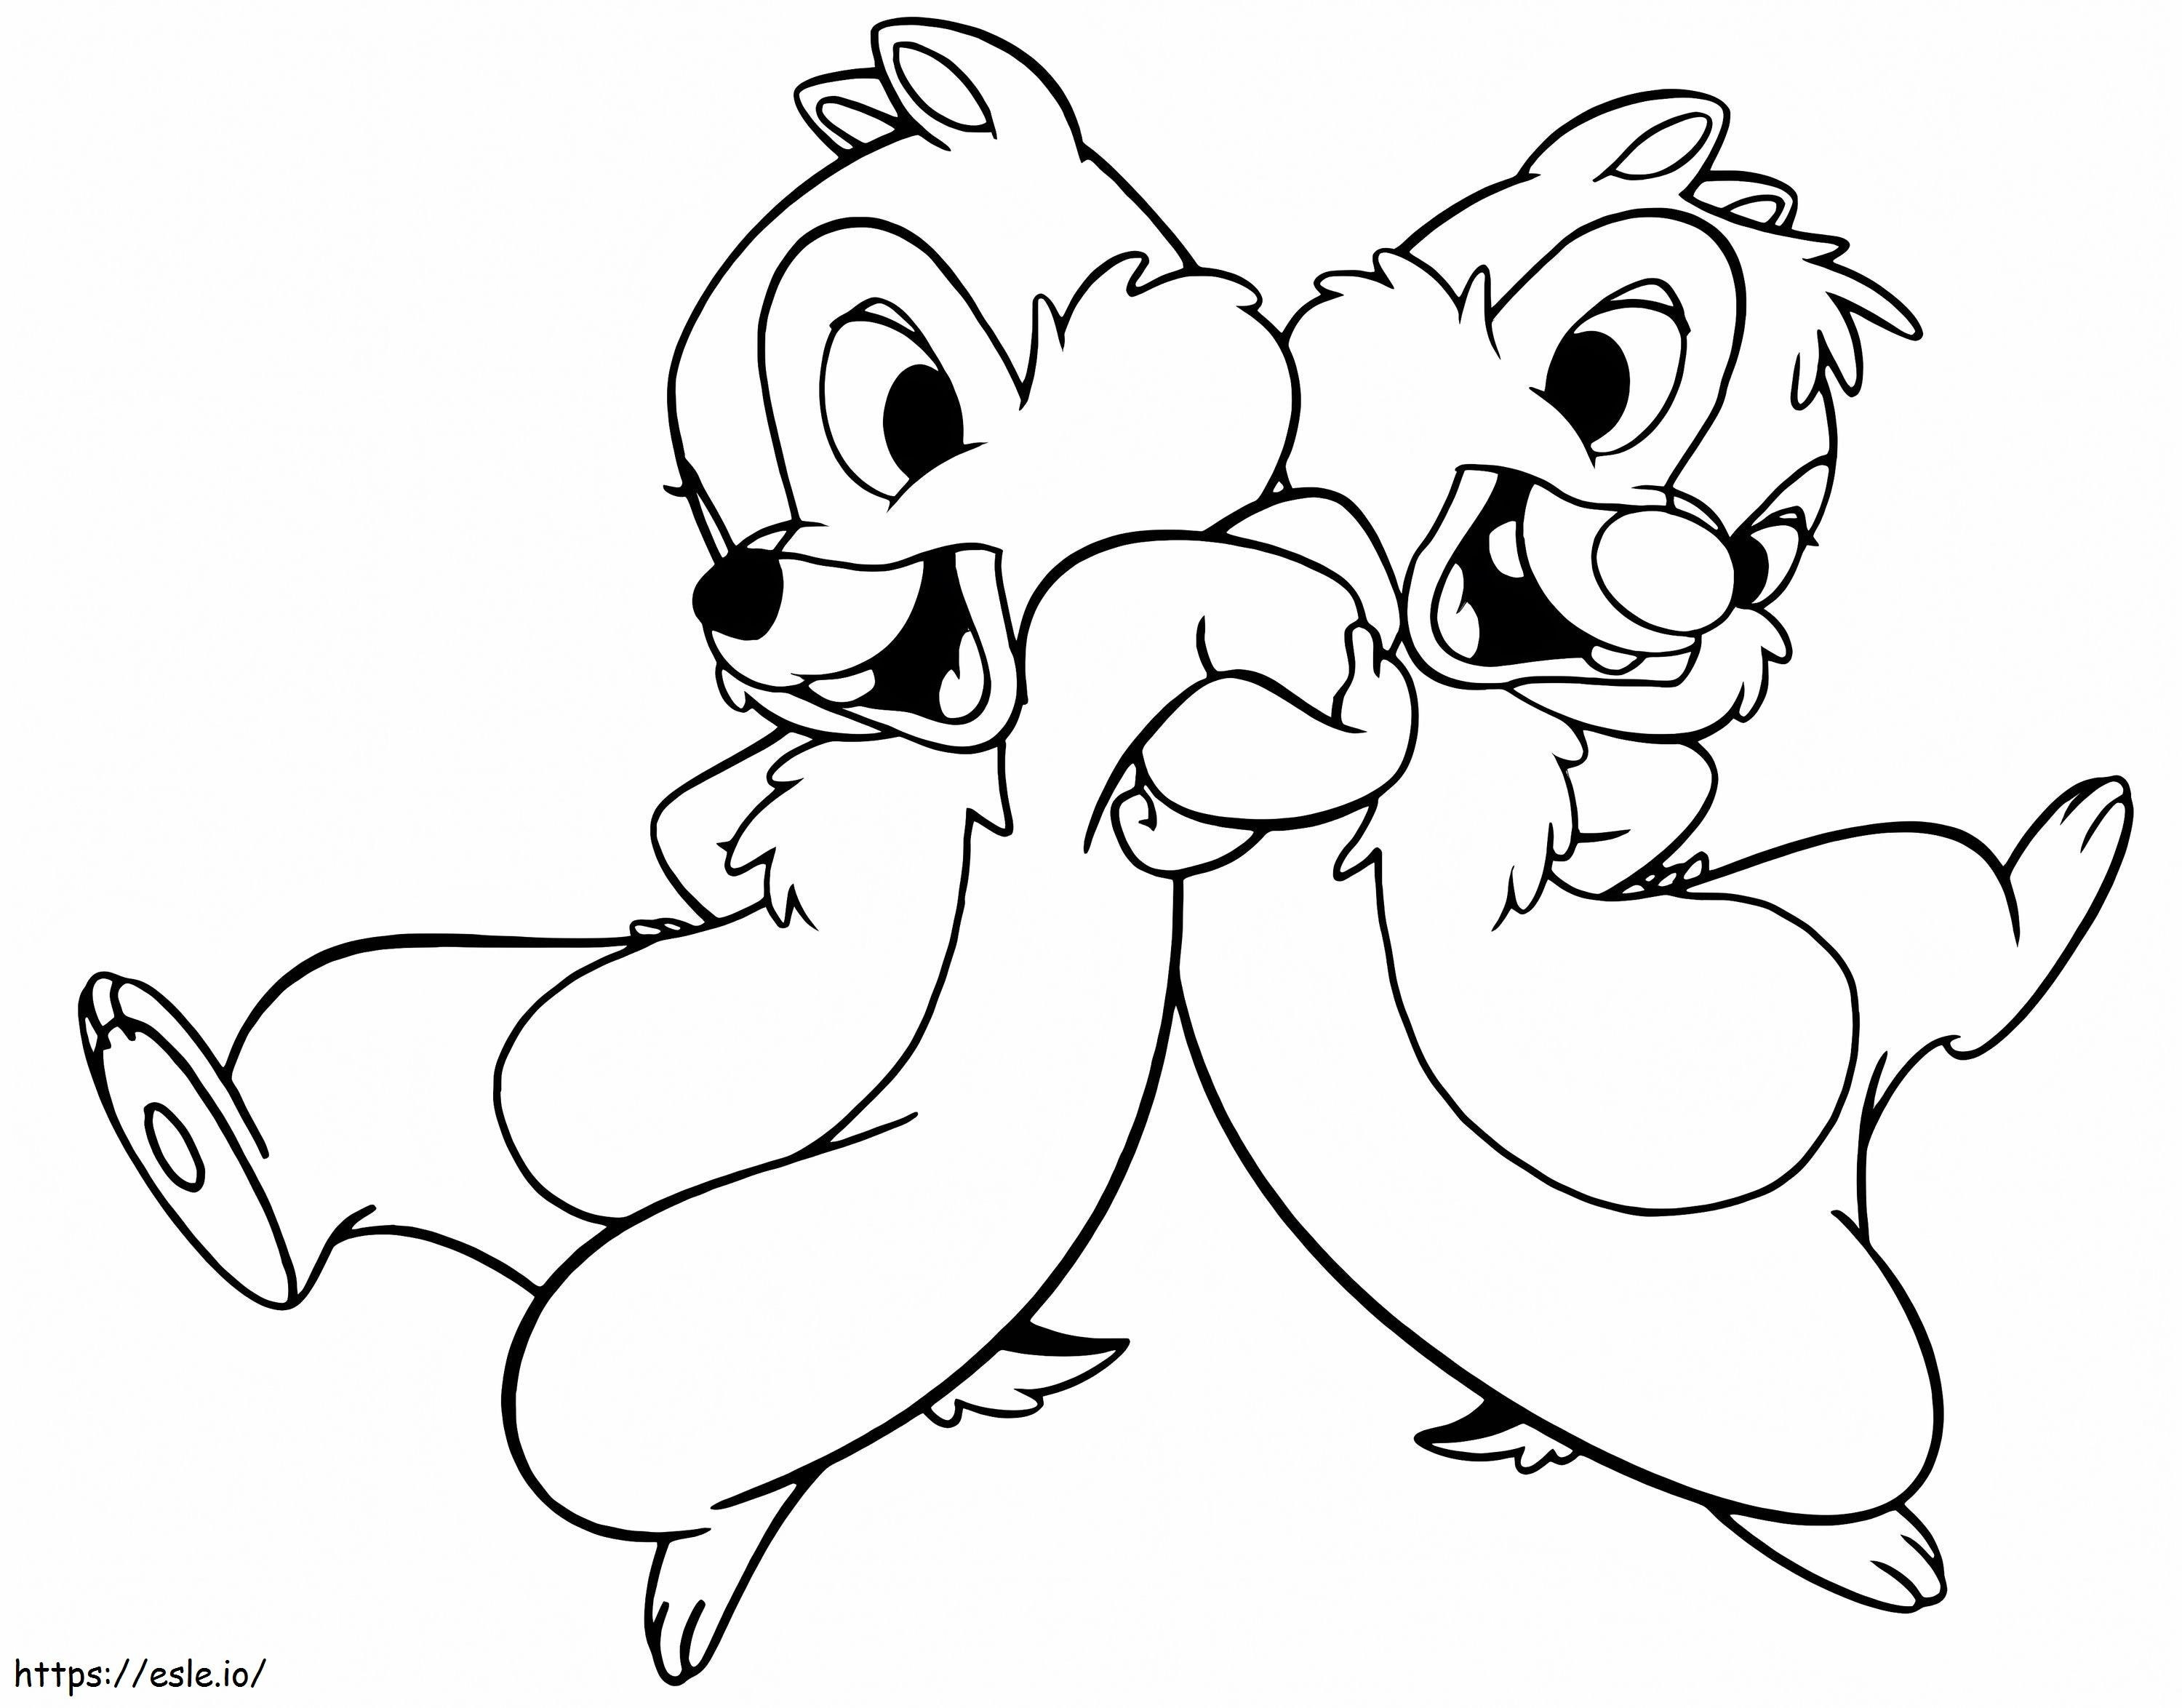 Funny Chip And Dale coloring page